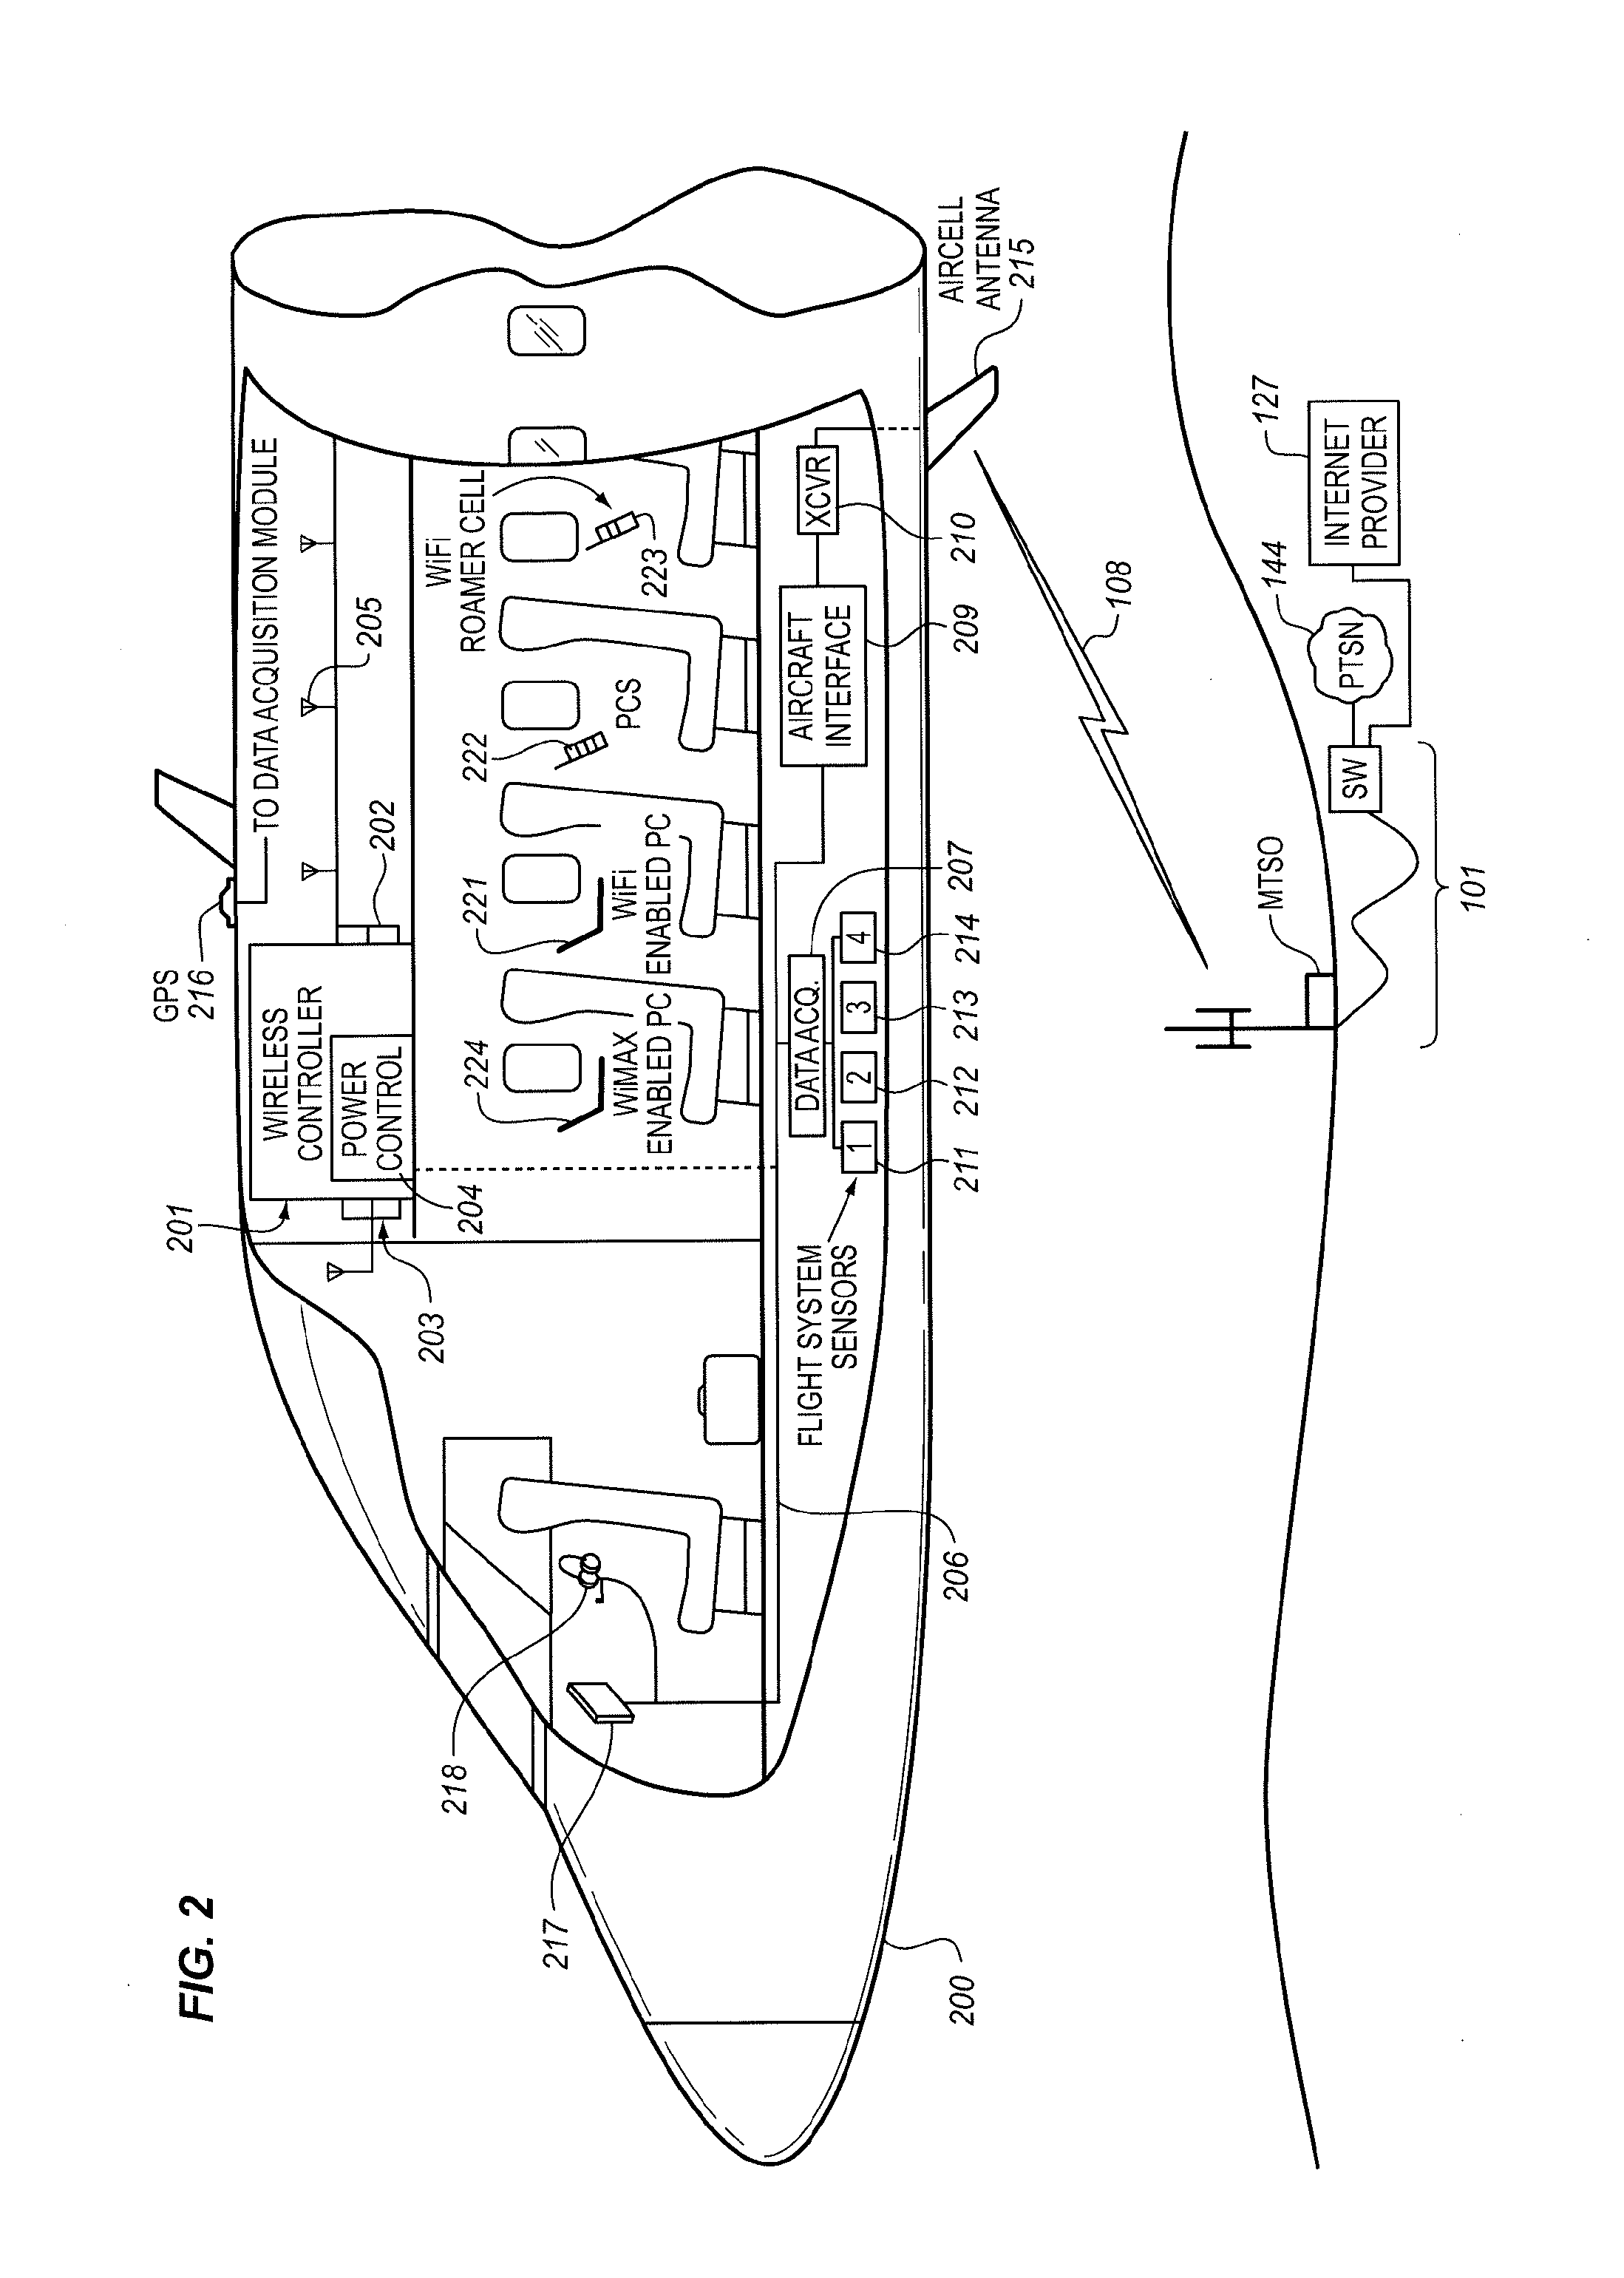 System for creating an air-to-ground IP tunnel in an airborne wireless cellular network to differentiate individual passengers